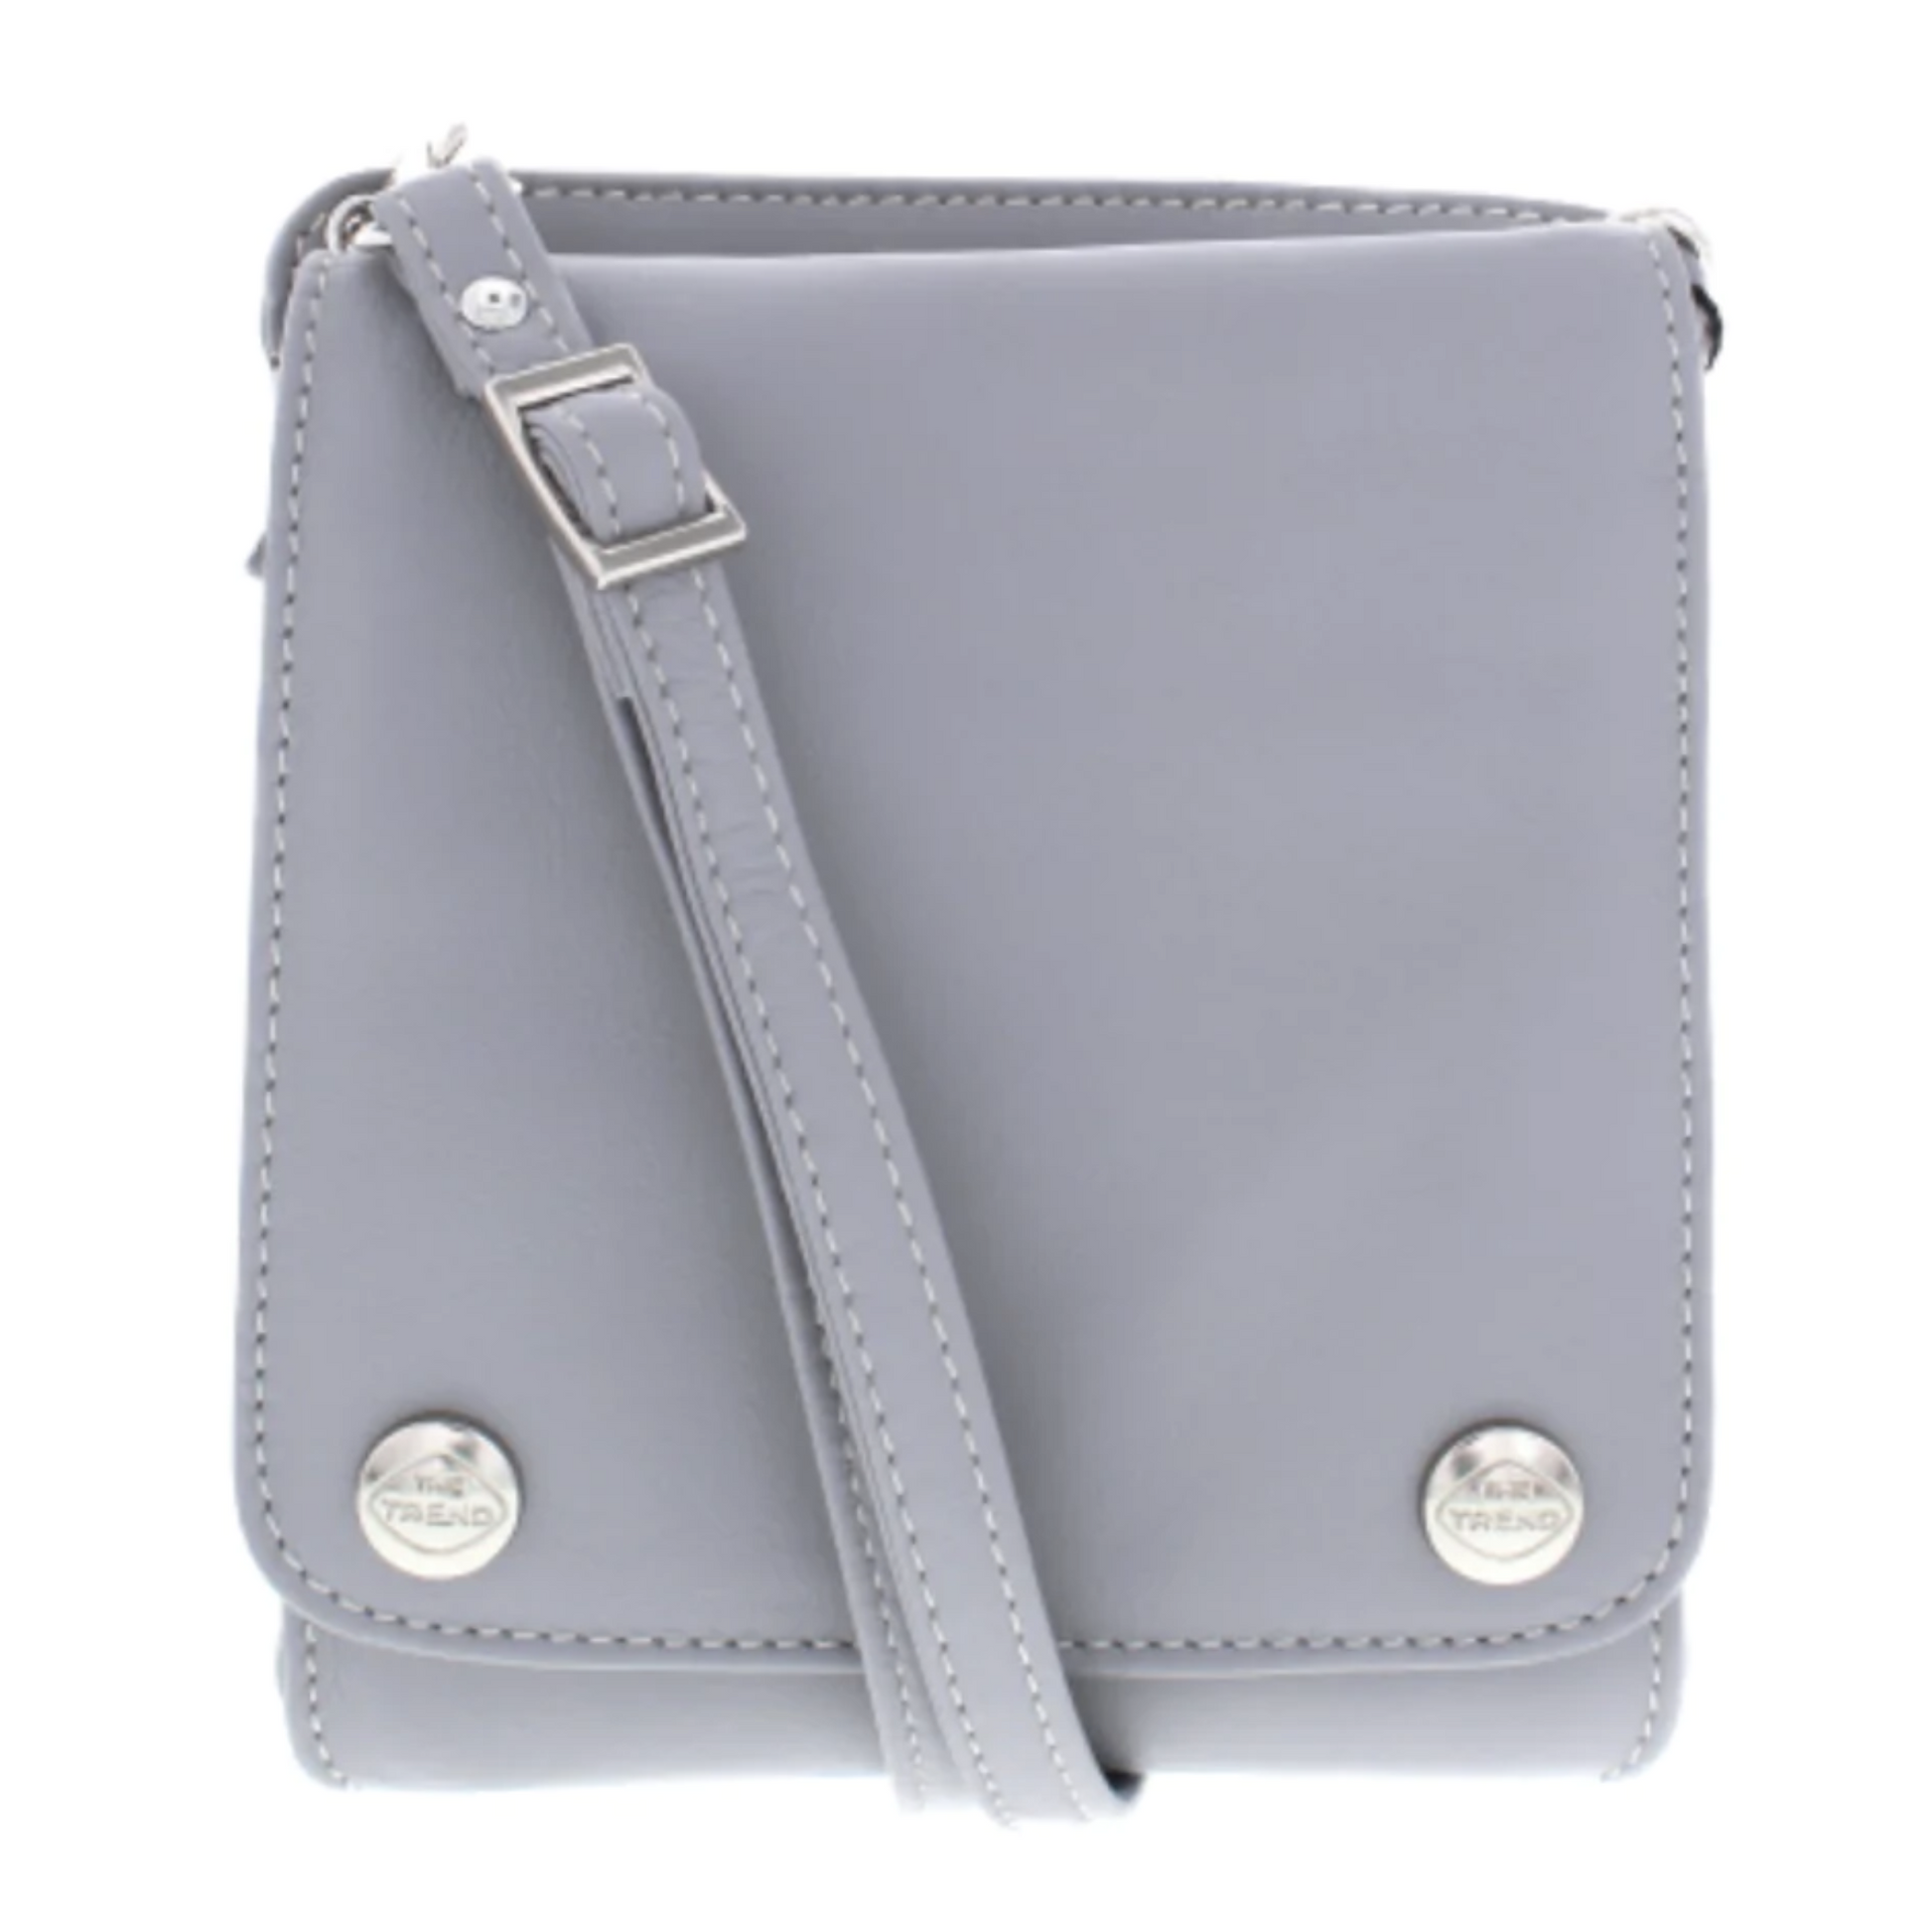 The front of a grey eather bag, with a square face and two shiny silver metal buttons, each bearing "The Trend" logo.